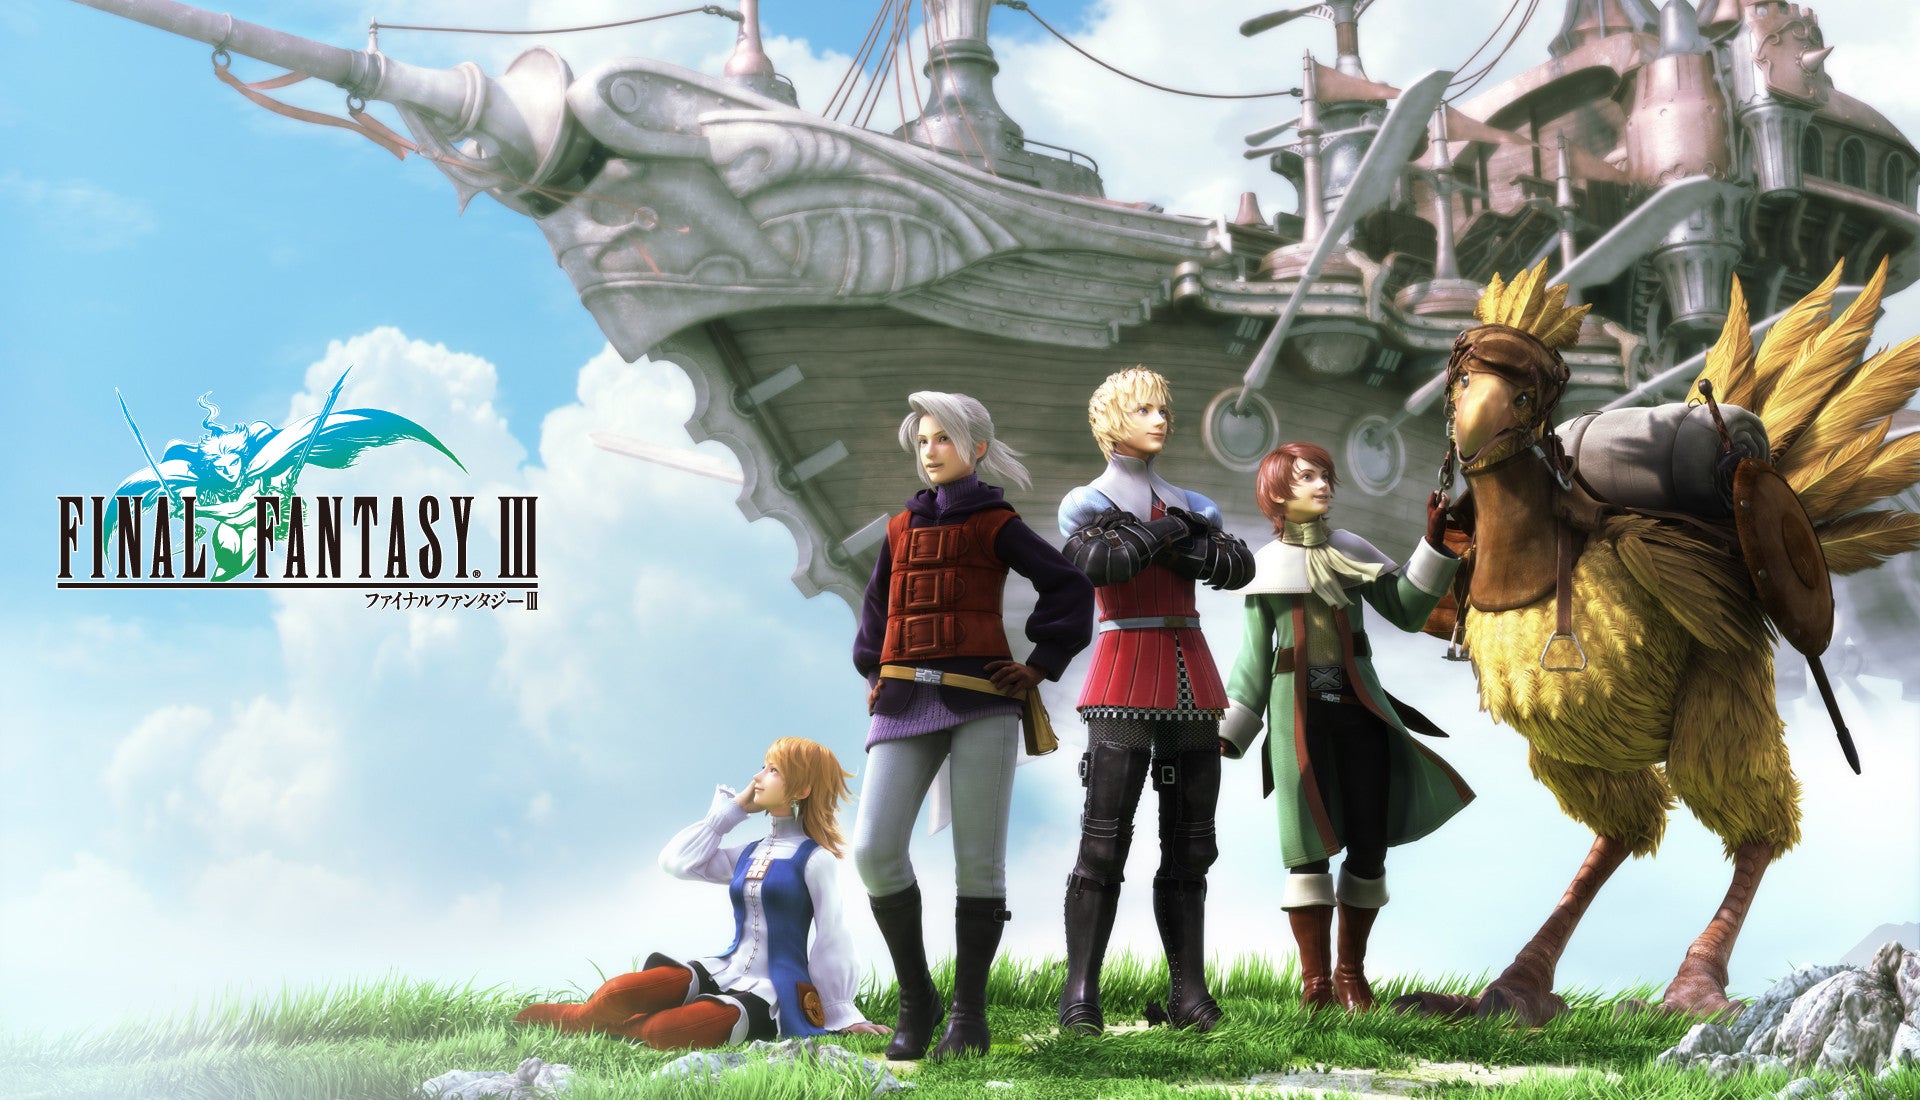 Final Fantasy I, II and III are 50% off on App Store until May 7